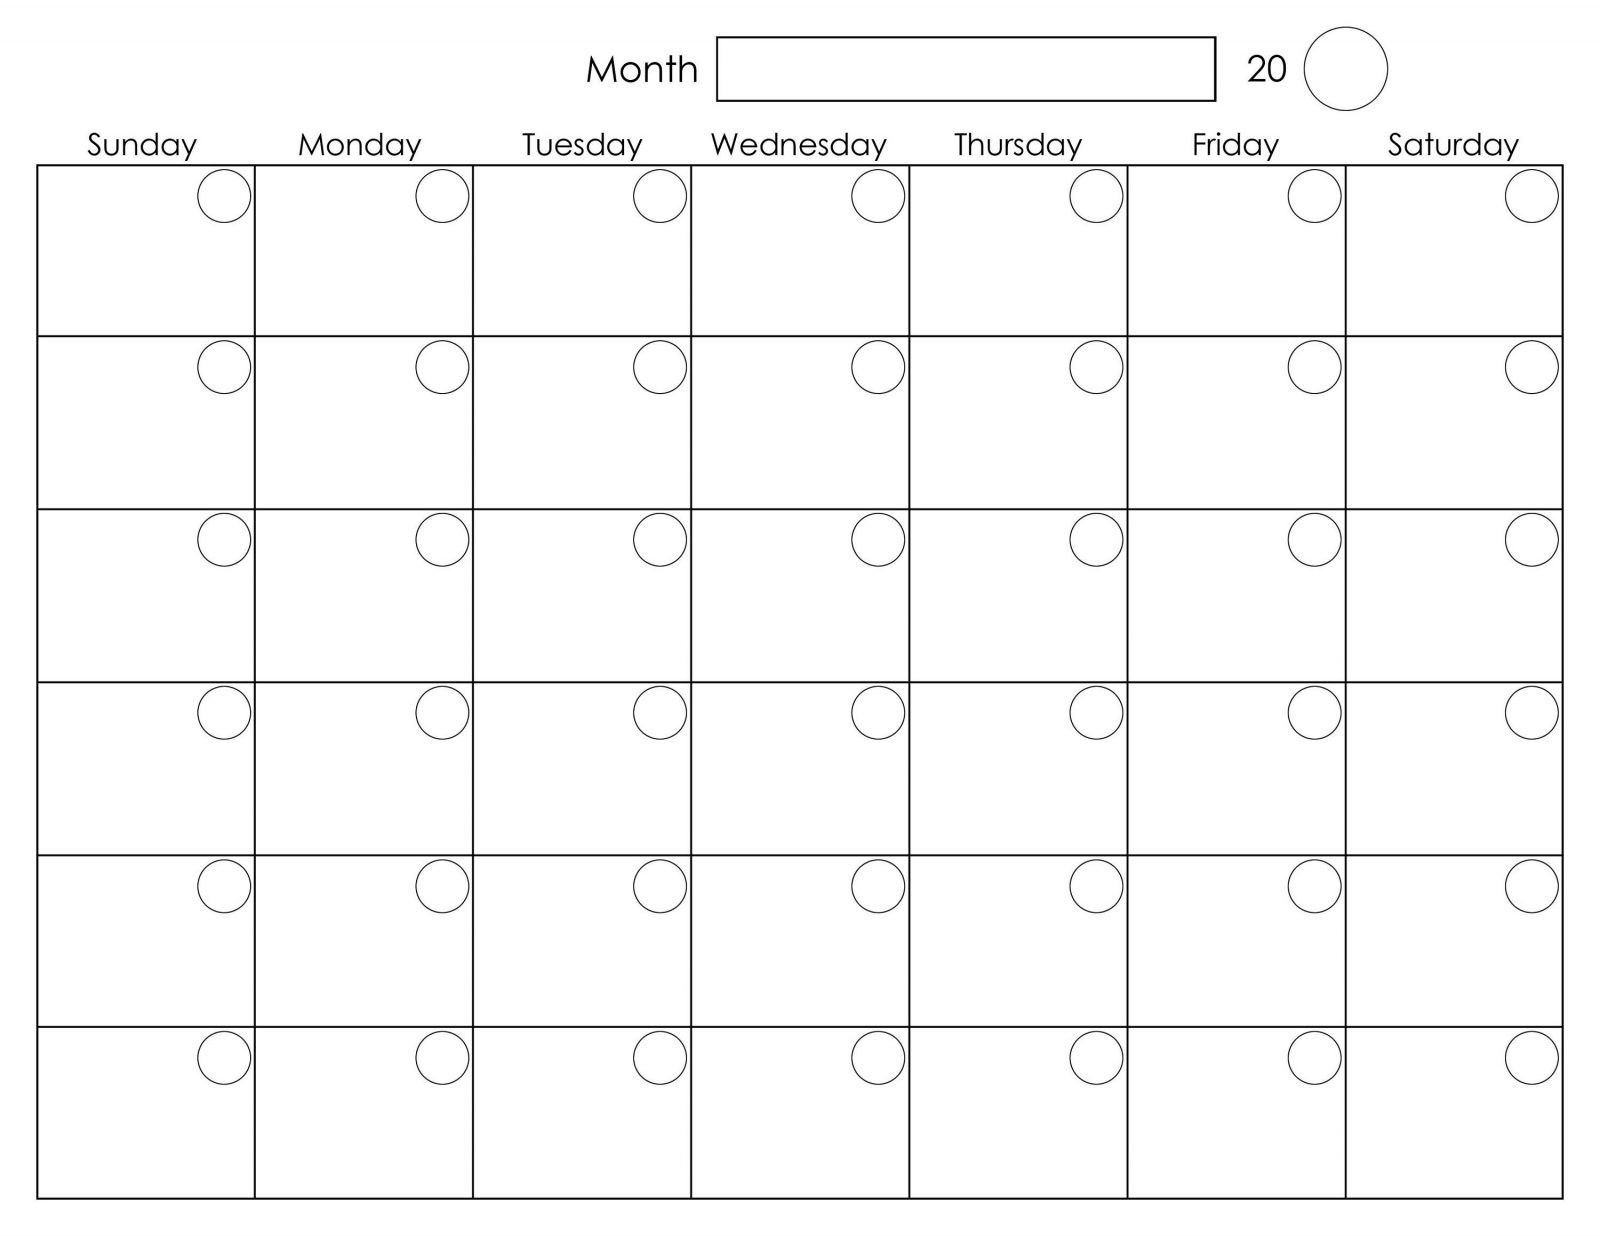 Blank Monthly Planner Starts On Monday Calendar Template Printable